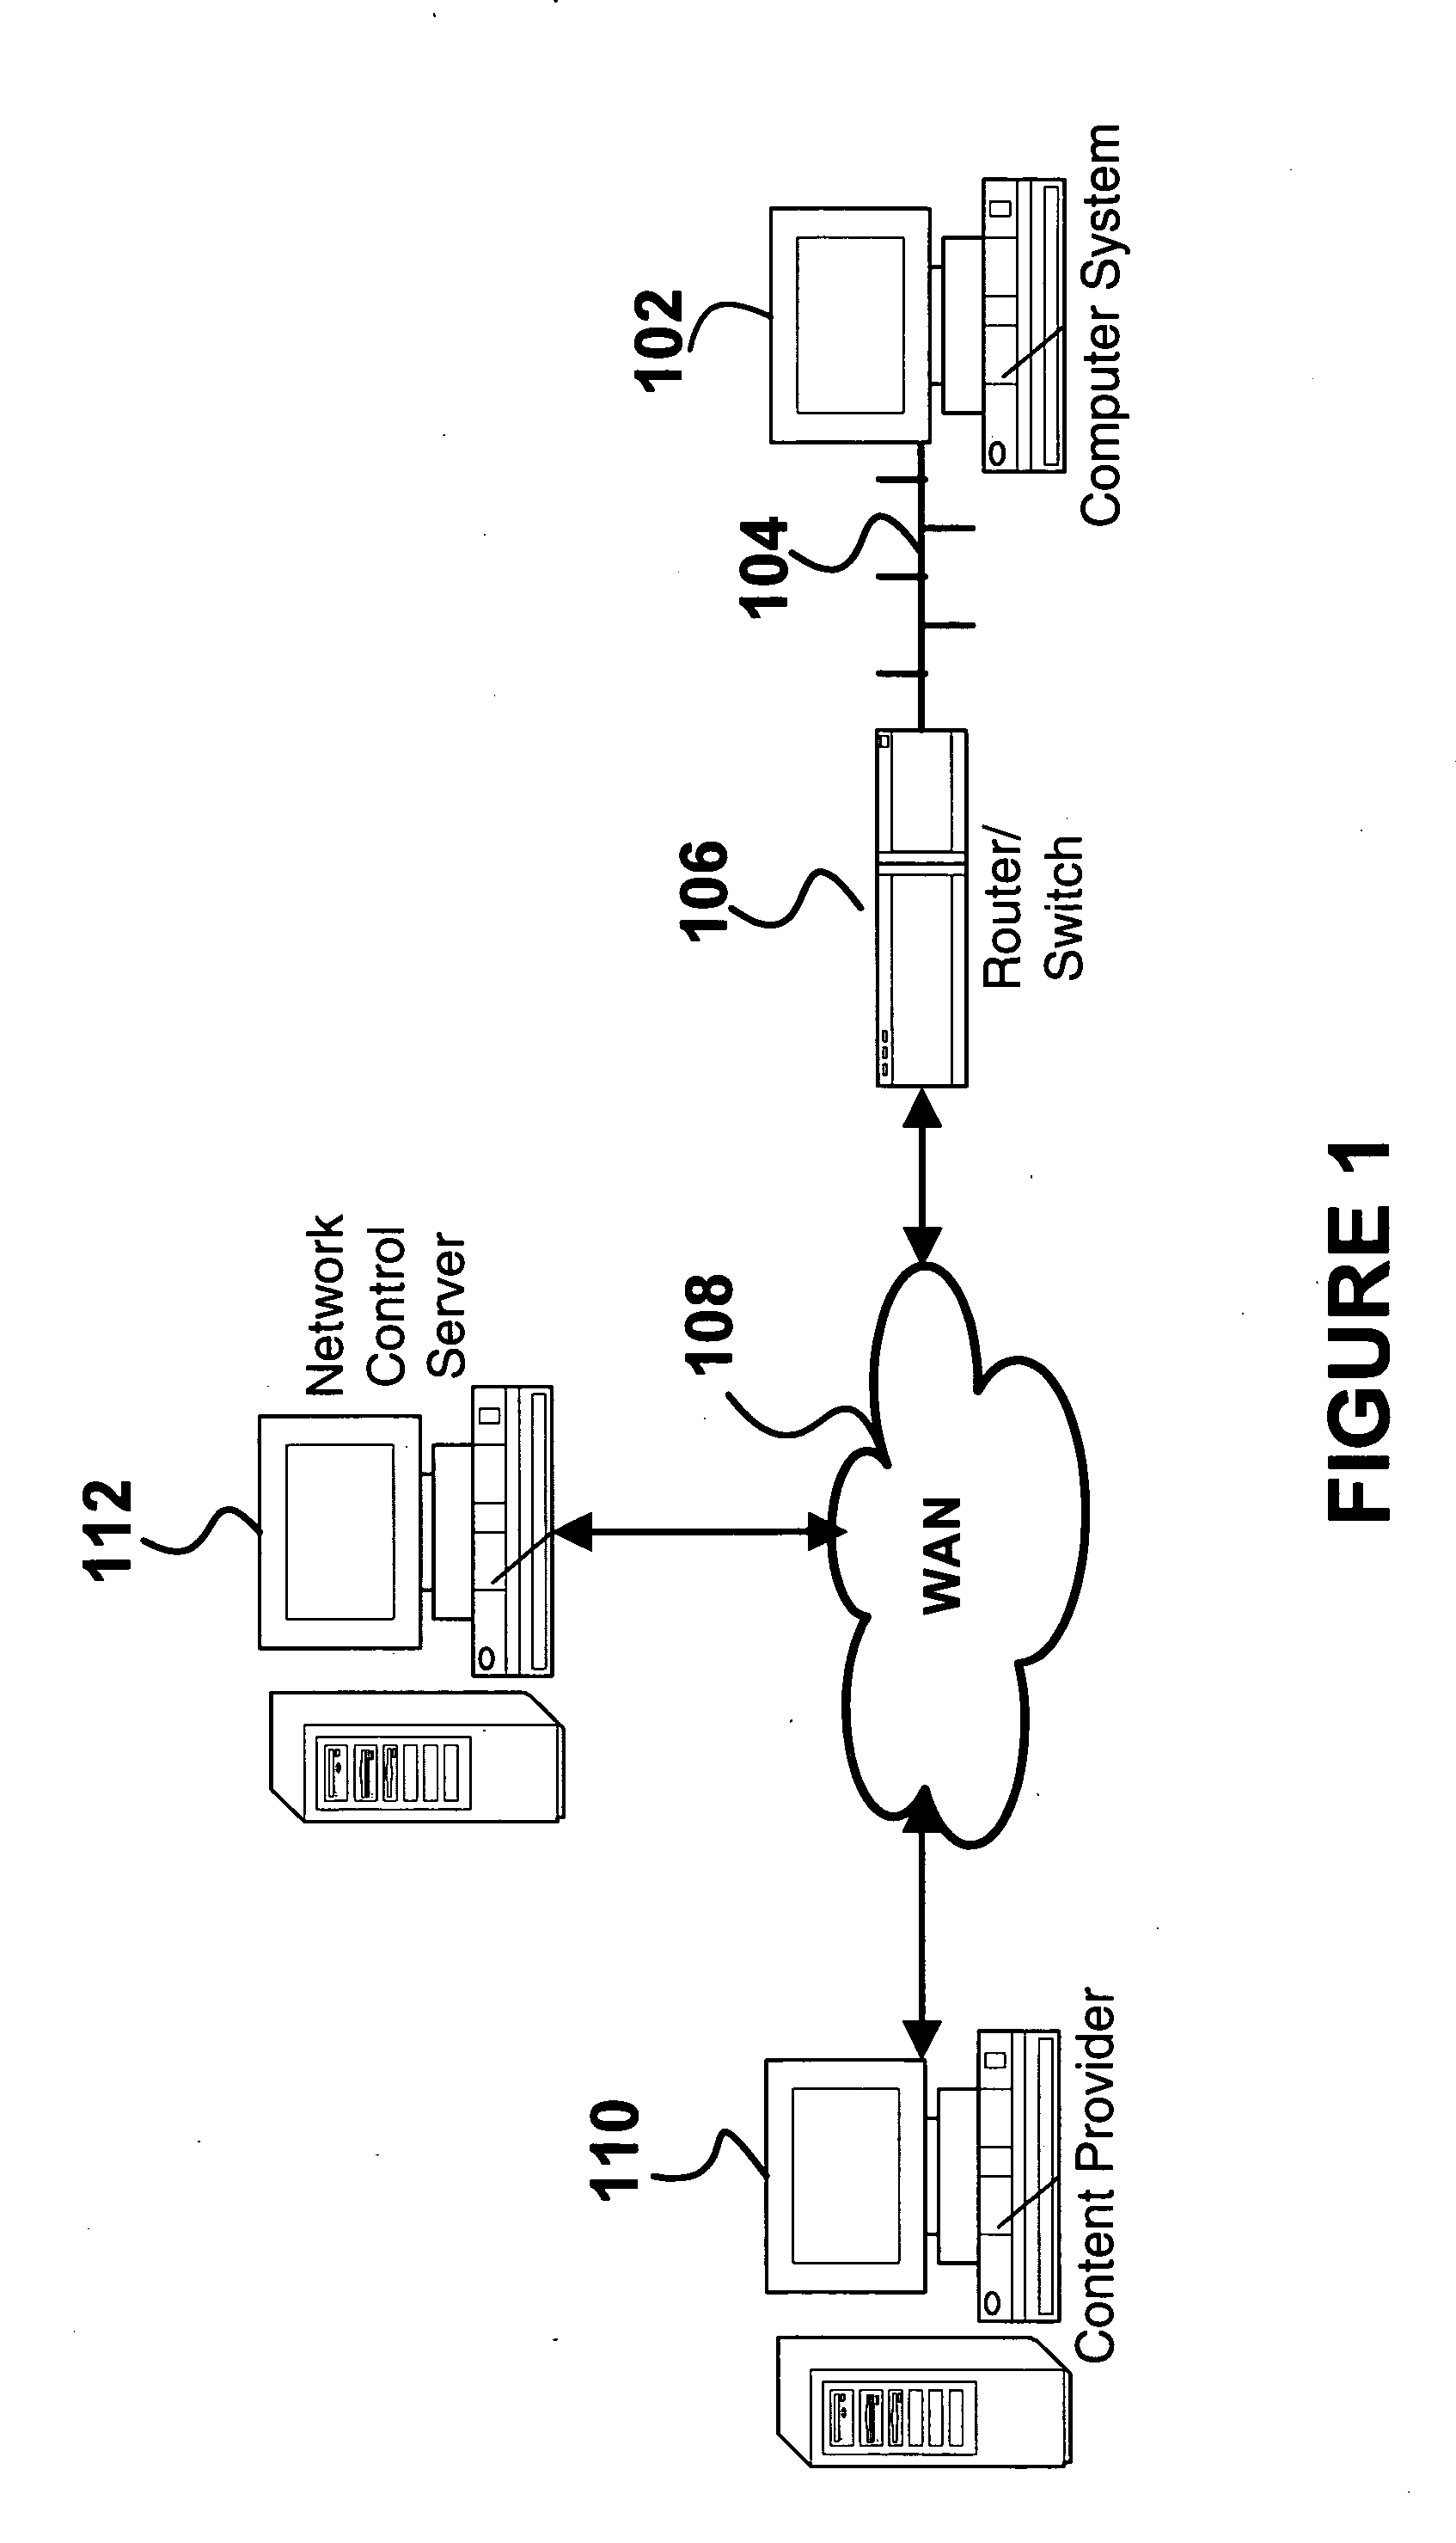 Method and apparatus for providing fixed bandwidth communications over a local area network